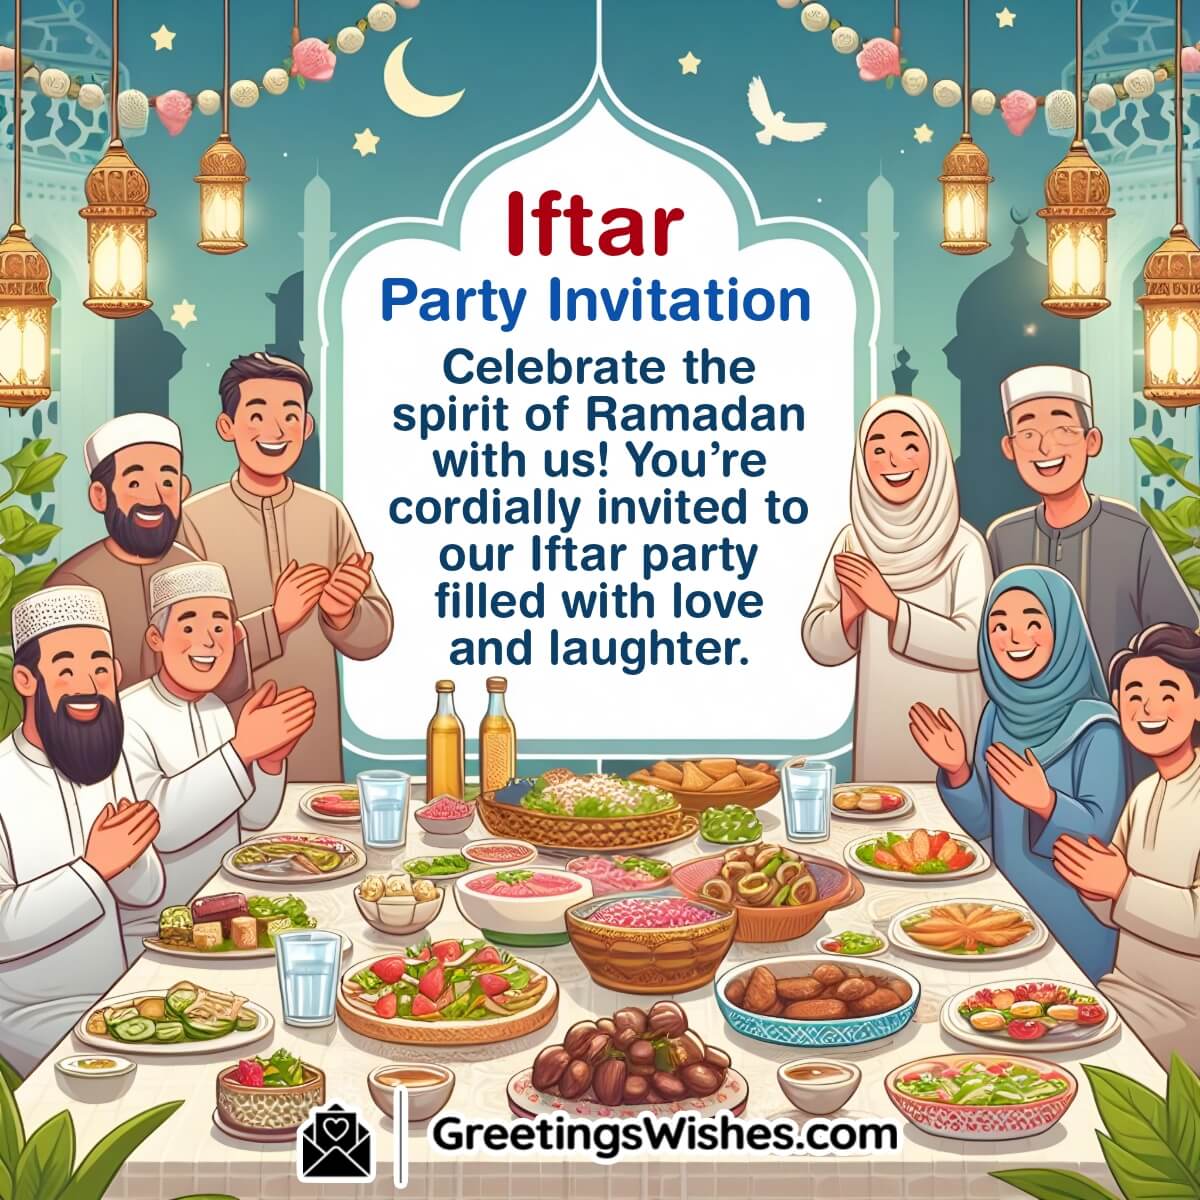 Iftar Party Invitation Messages